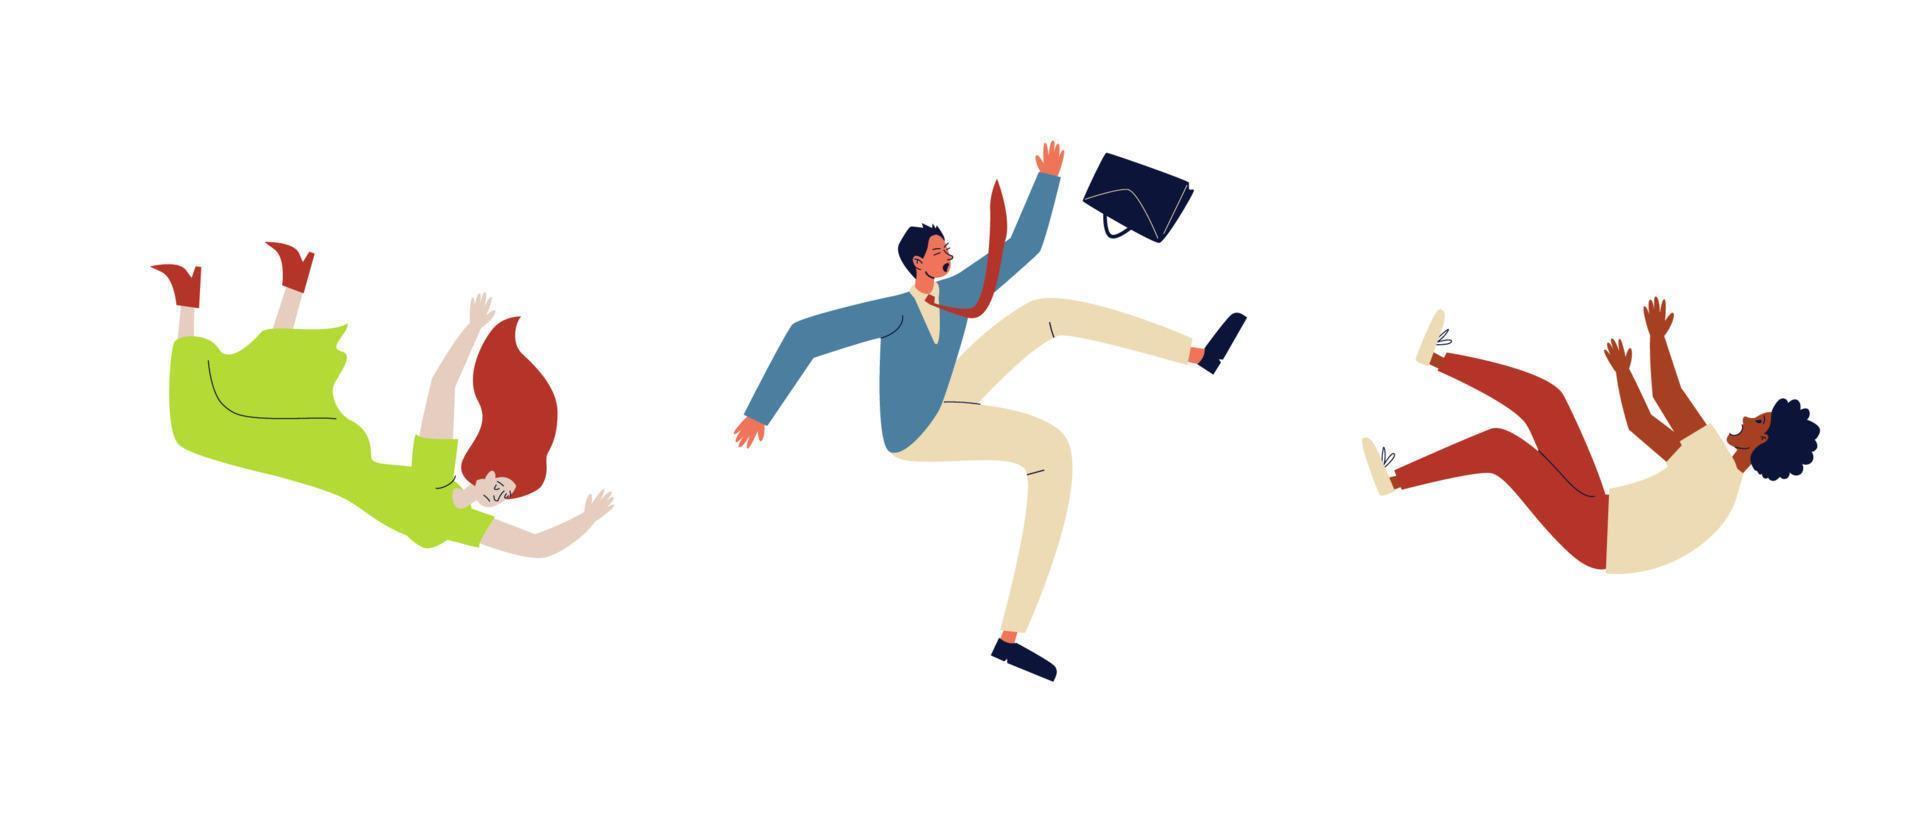 Cartoon people fall. Different men and women fall and no one will help them. Vector stock illustration concept of dismissal of working men and women.